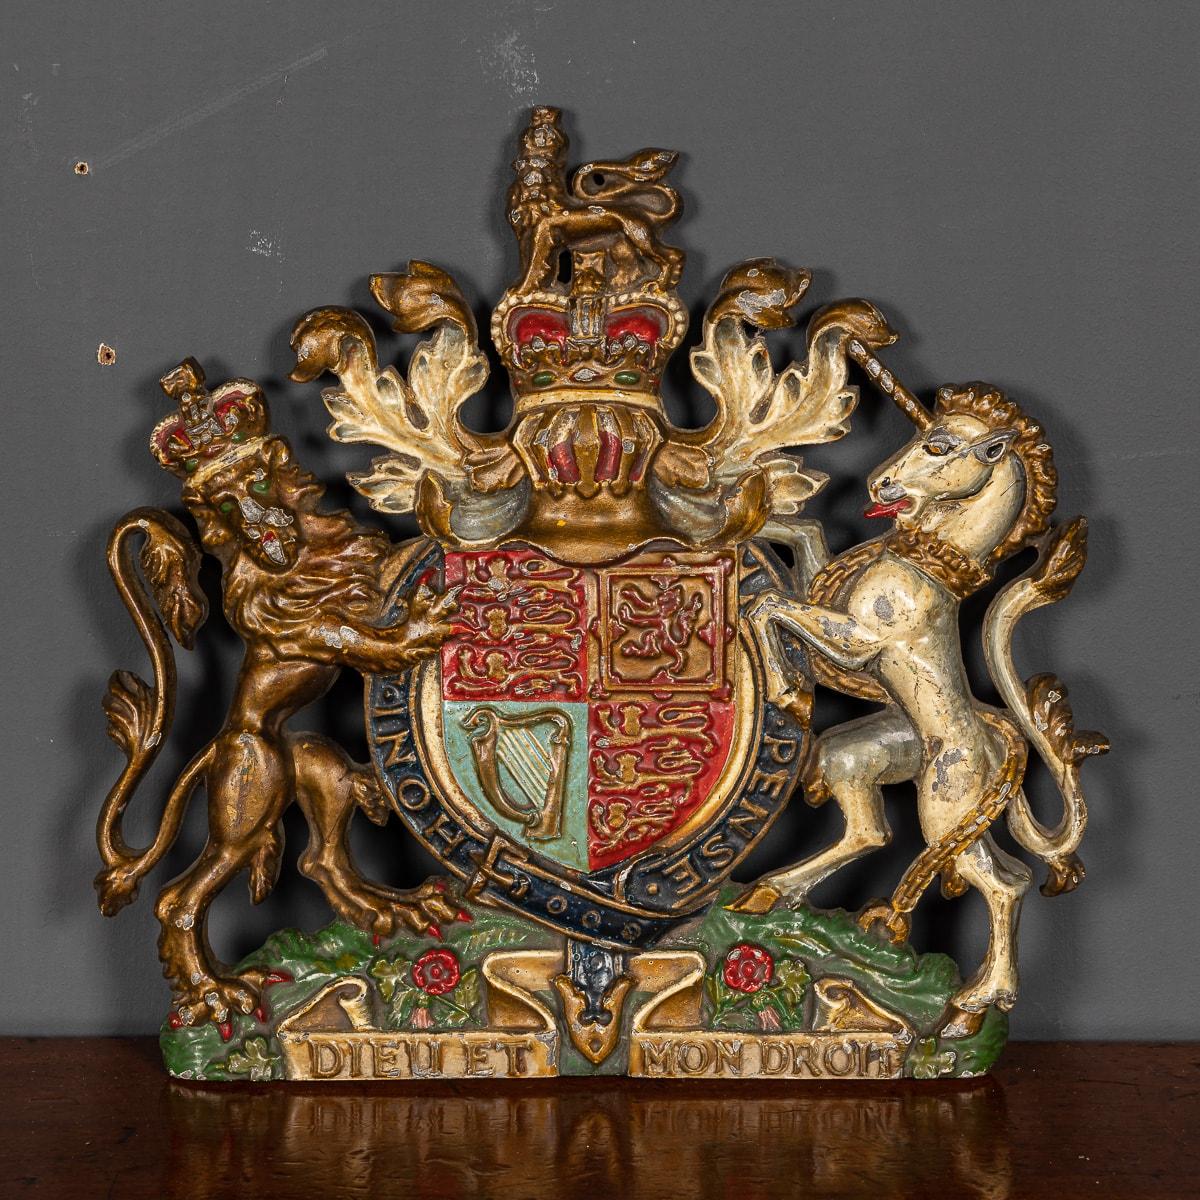 Superb 20th Century large and impressive, beautifully hand painted, cast iron English Royal Warrant, presented by Queen Elizabeth II to a retailer for a services to herself or her household. An incredible piece of history and a very decorative